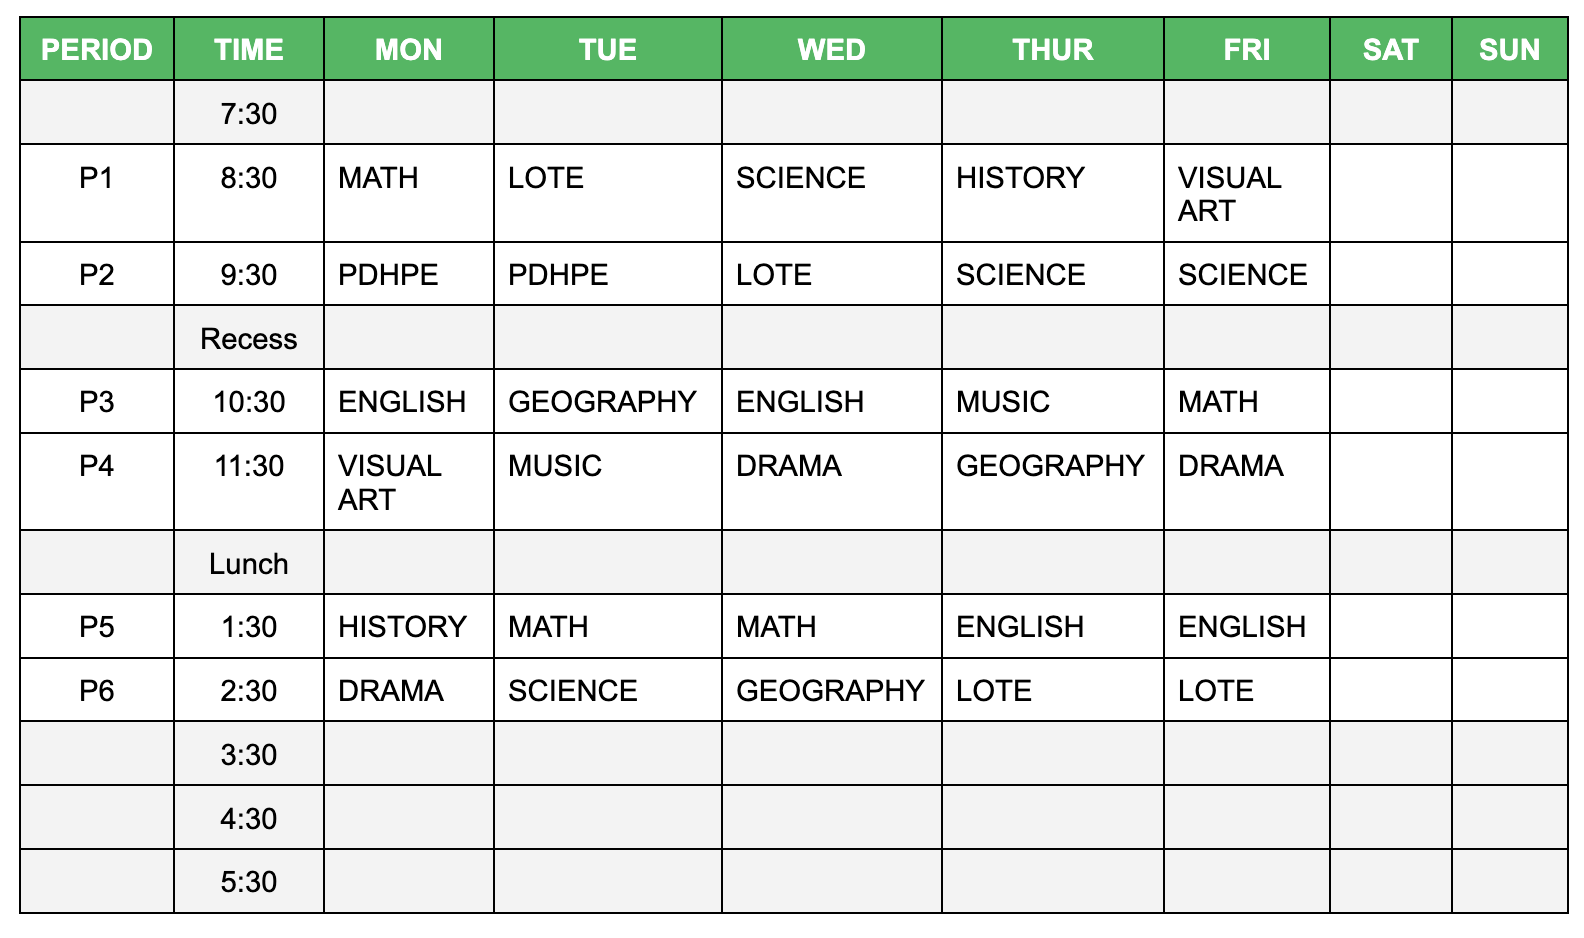 Timetable Example (School timetable)